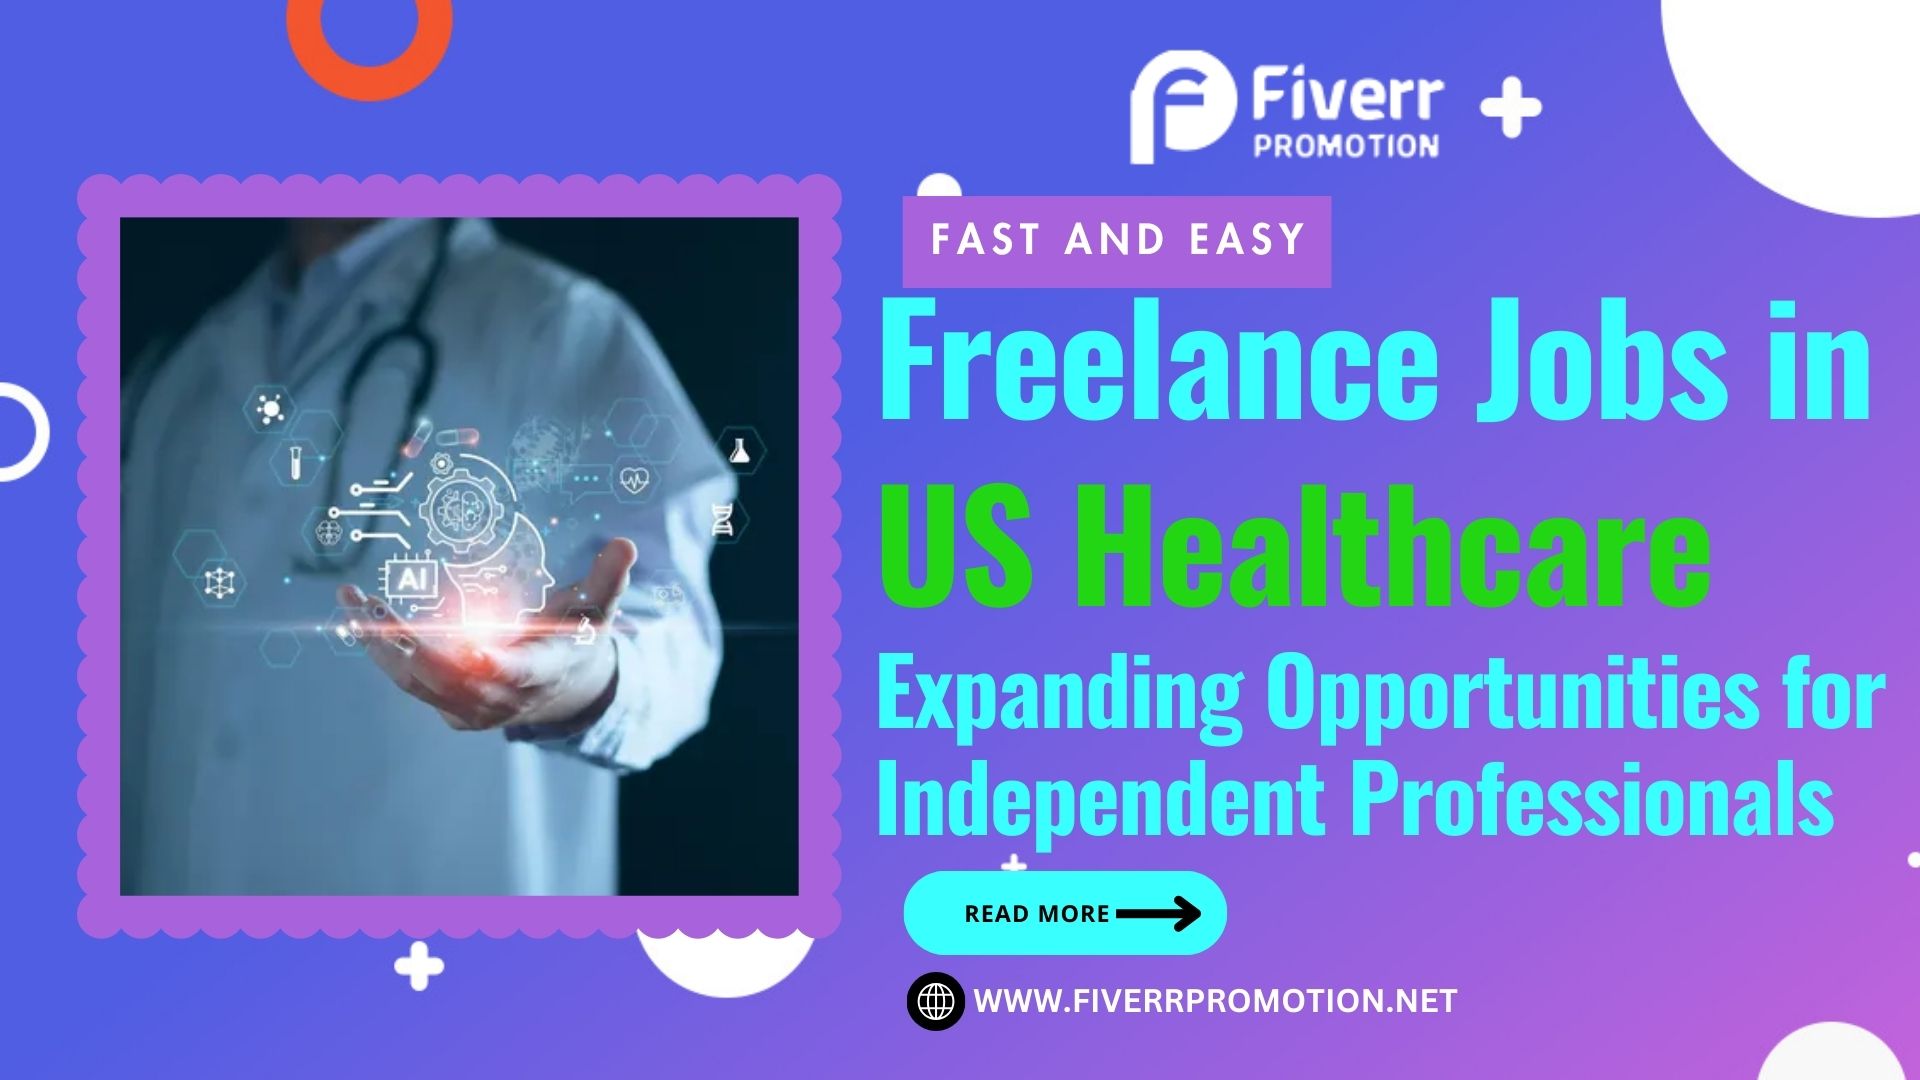 Fast and Easy Freelance Jobs in US Healthcare: Expanding Opportunities for Independent Professionals